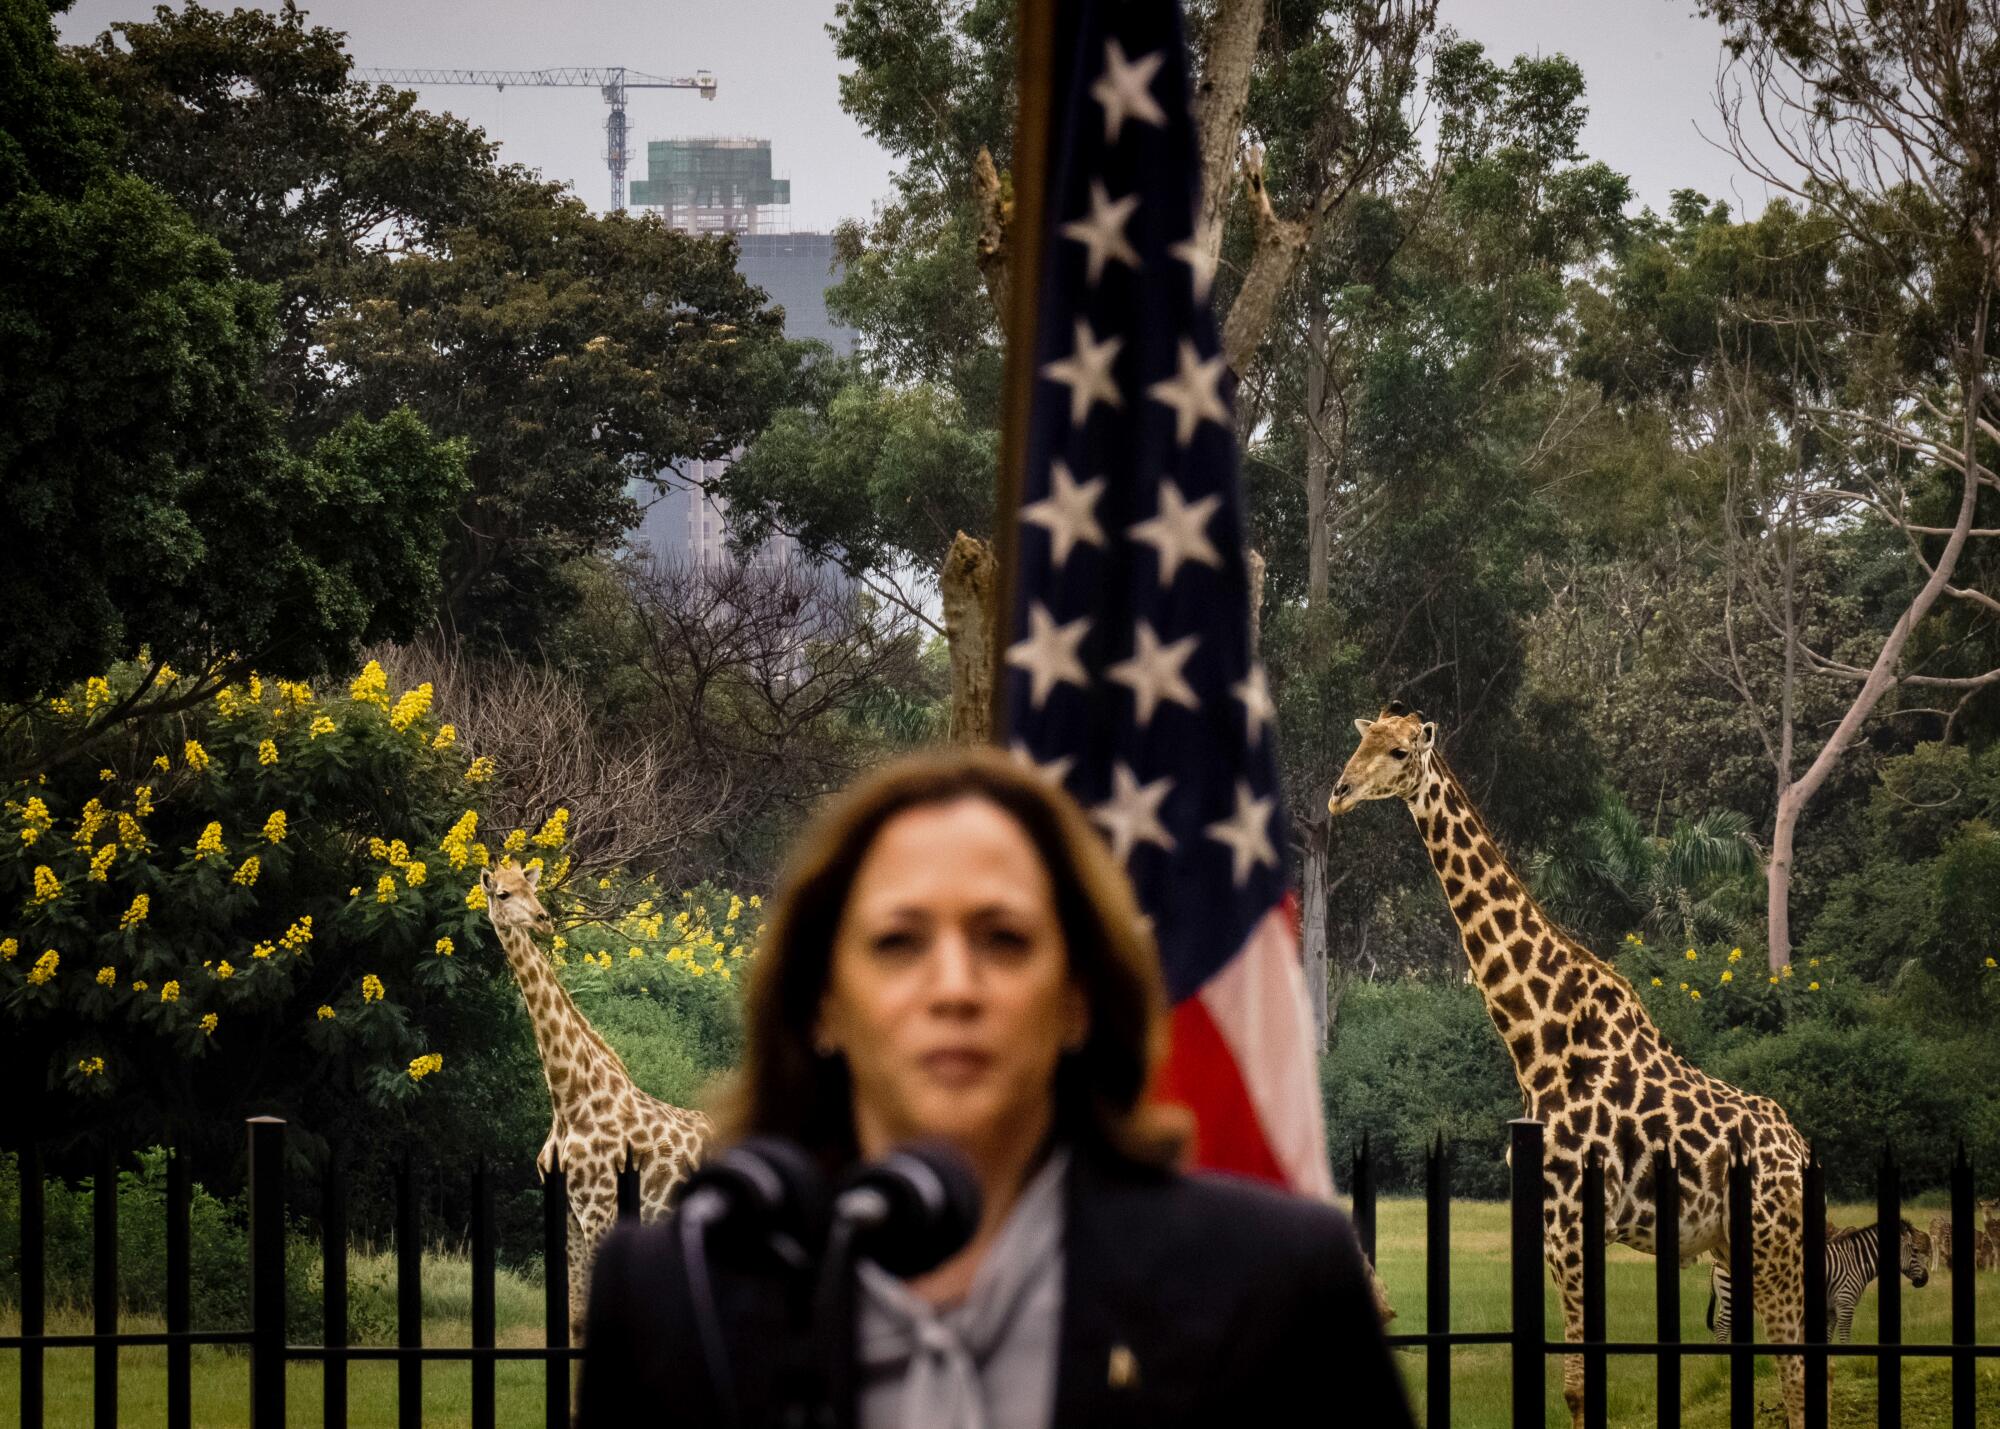 Giraffes are seen in the background as Vice President Kamala Harris speaks during a news conference in Zambia.